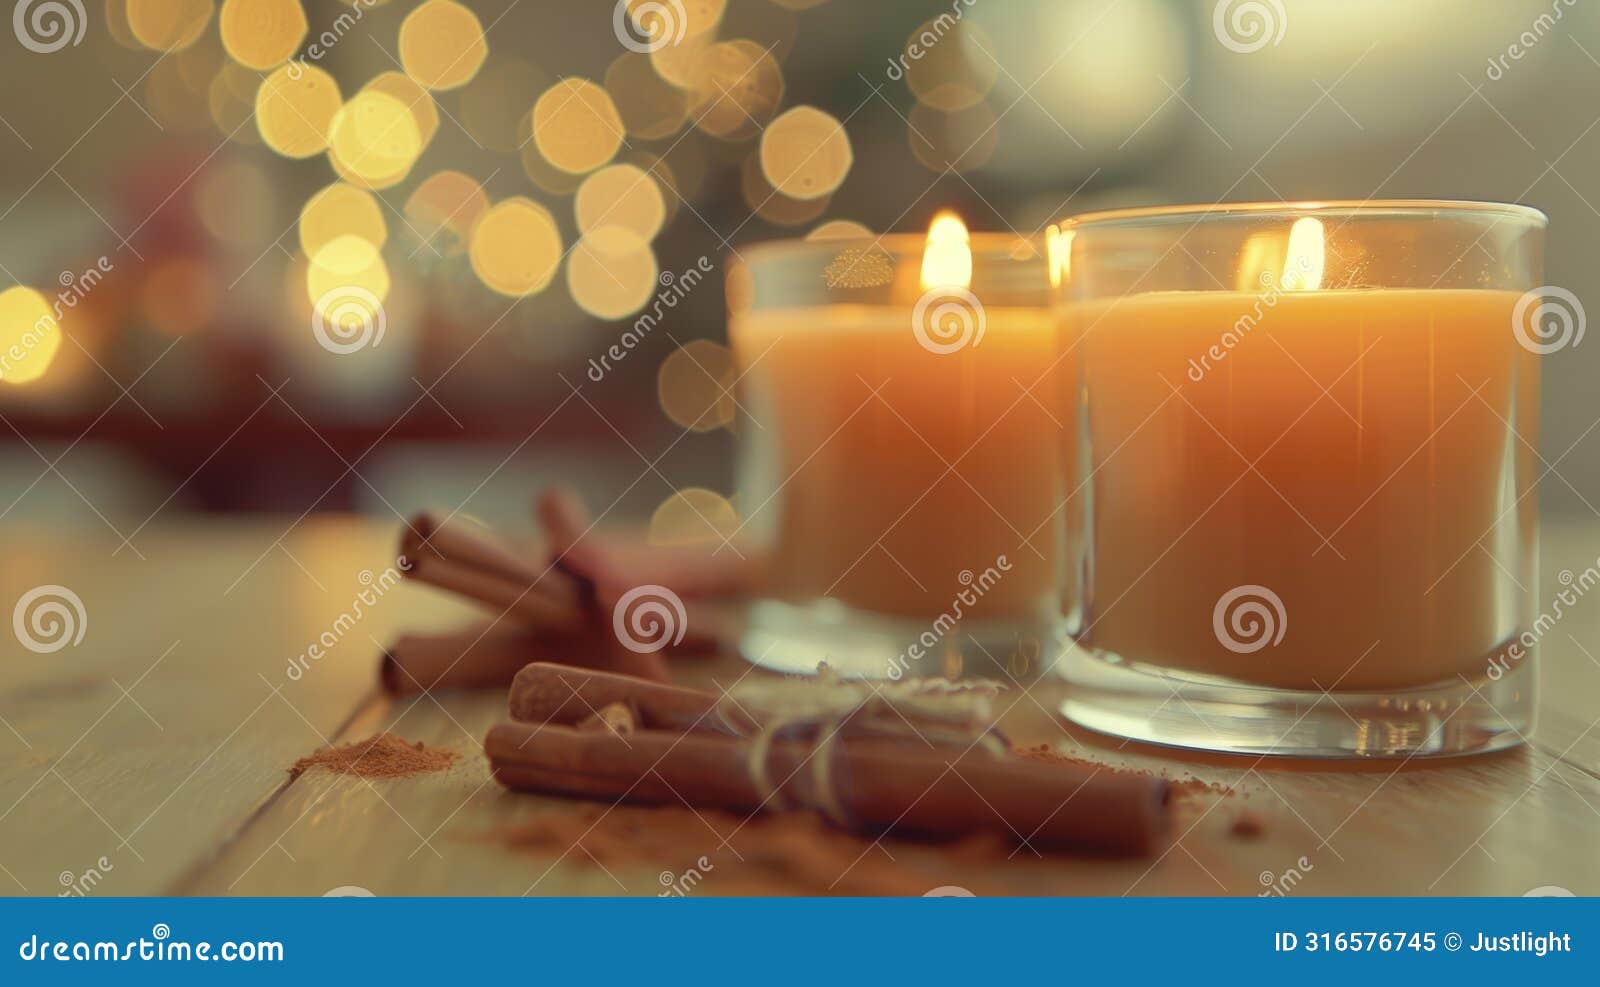 the aroma of warm vanilla and cinnamon from the candles mingles with the delicious scents coming from the kitchen. 2d